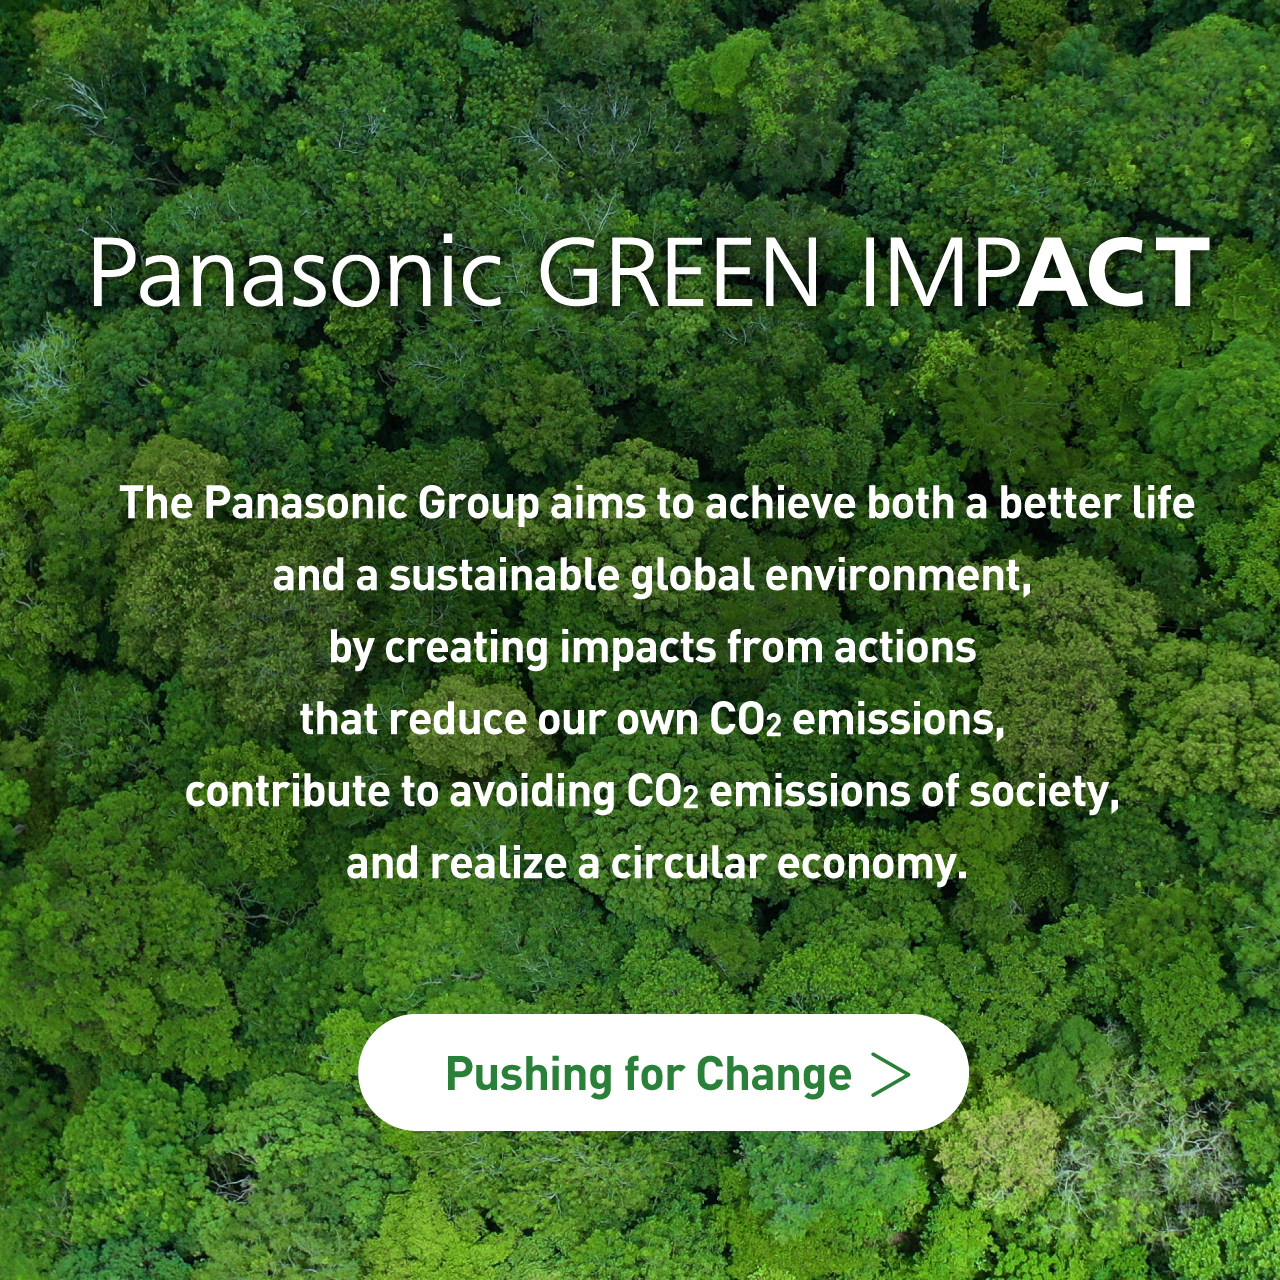 The Panasonic Group aims to achieve both a better life and a sustainable global environment, by creating impacts from actions that reduce our own CO2 emissions, contribute to avoiding CO2 emissions of society, and realize a circular economy. Pushing for Change